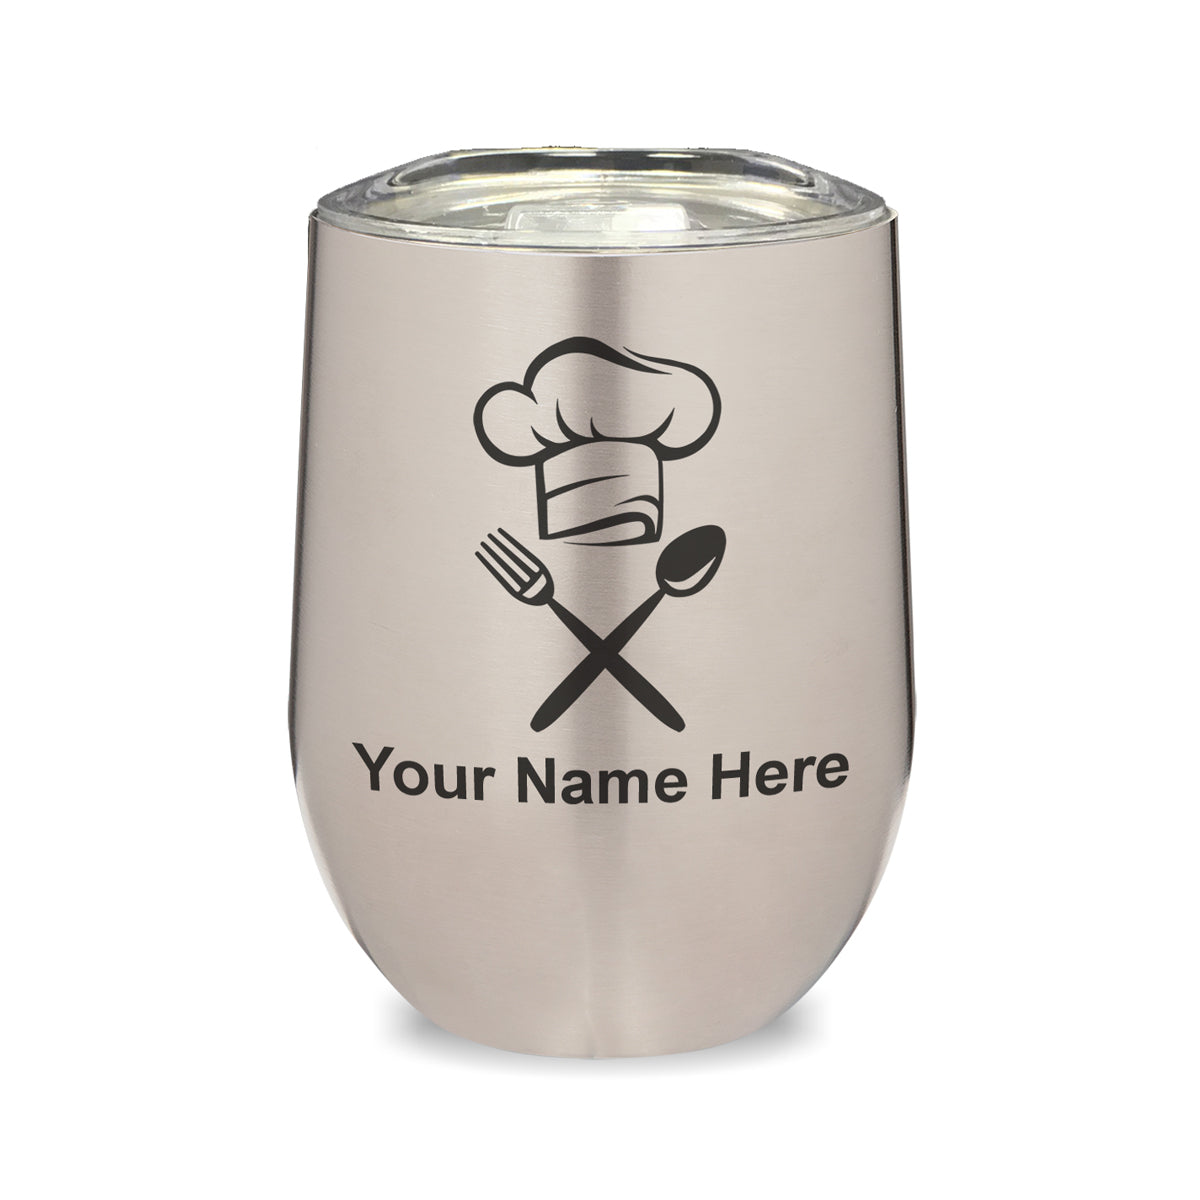 LaserGram Double Wall Stainless Steel Wine Glass, Chef Hat, Personalized Engraving Included